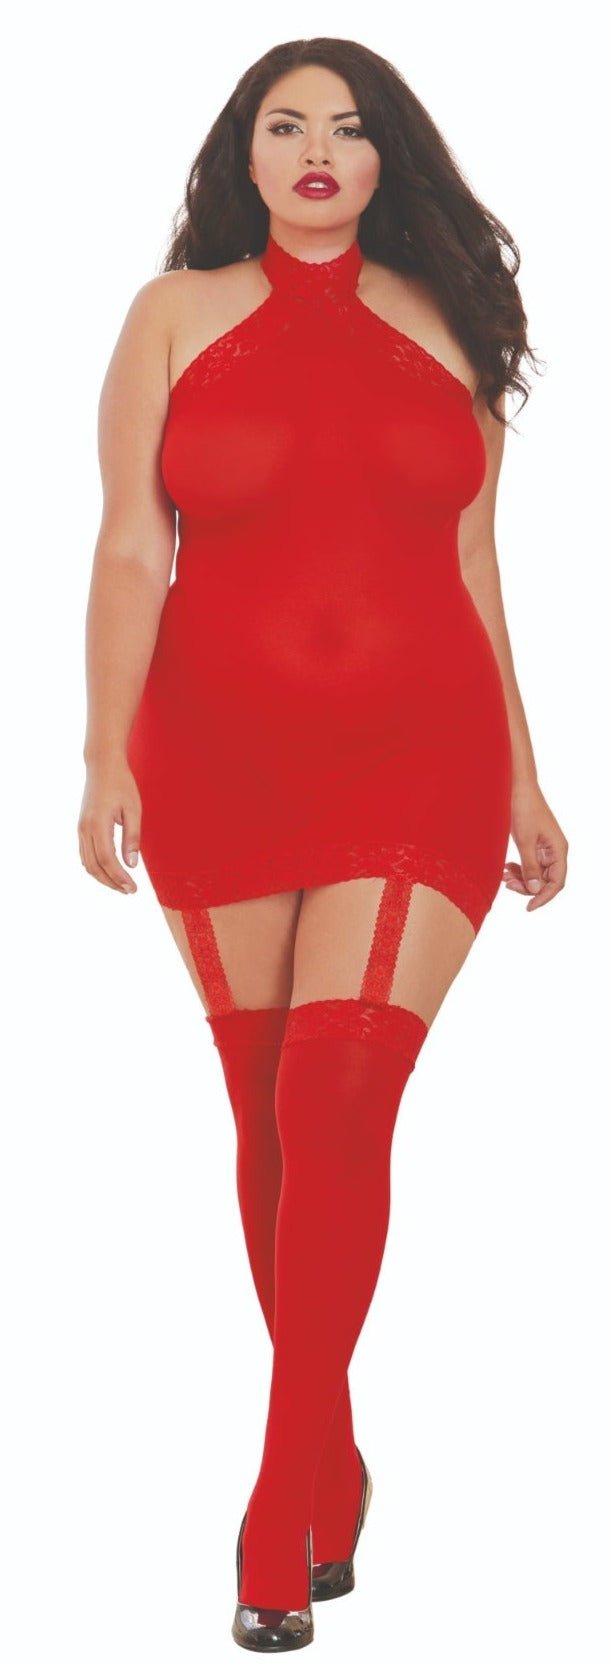 Plus Size Garter Bodystocking Dress with Thigh Highs Musotica.com